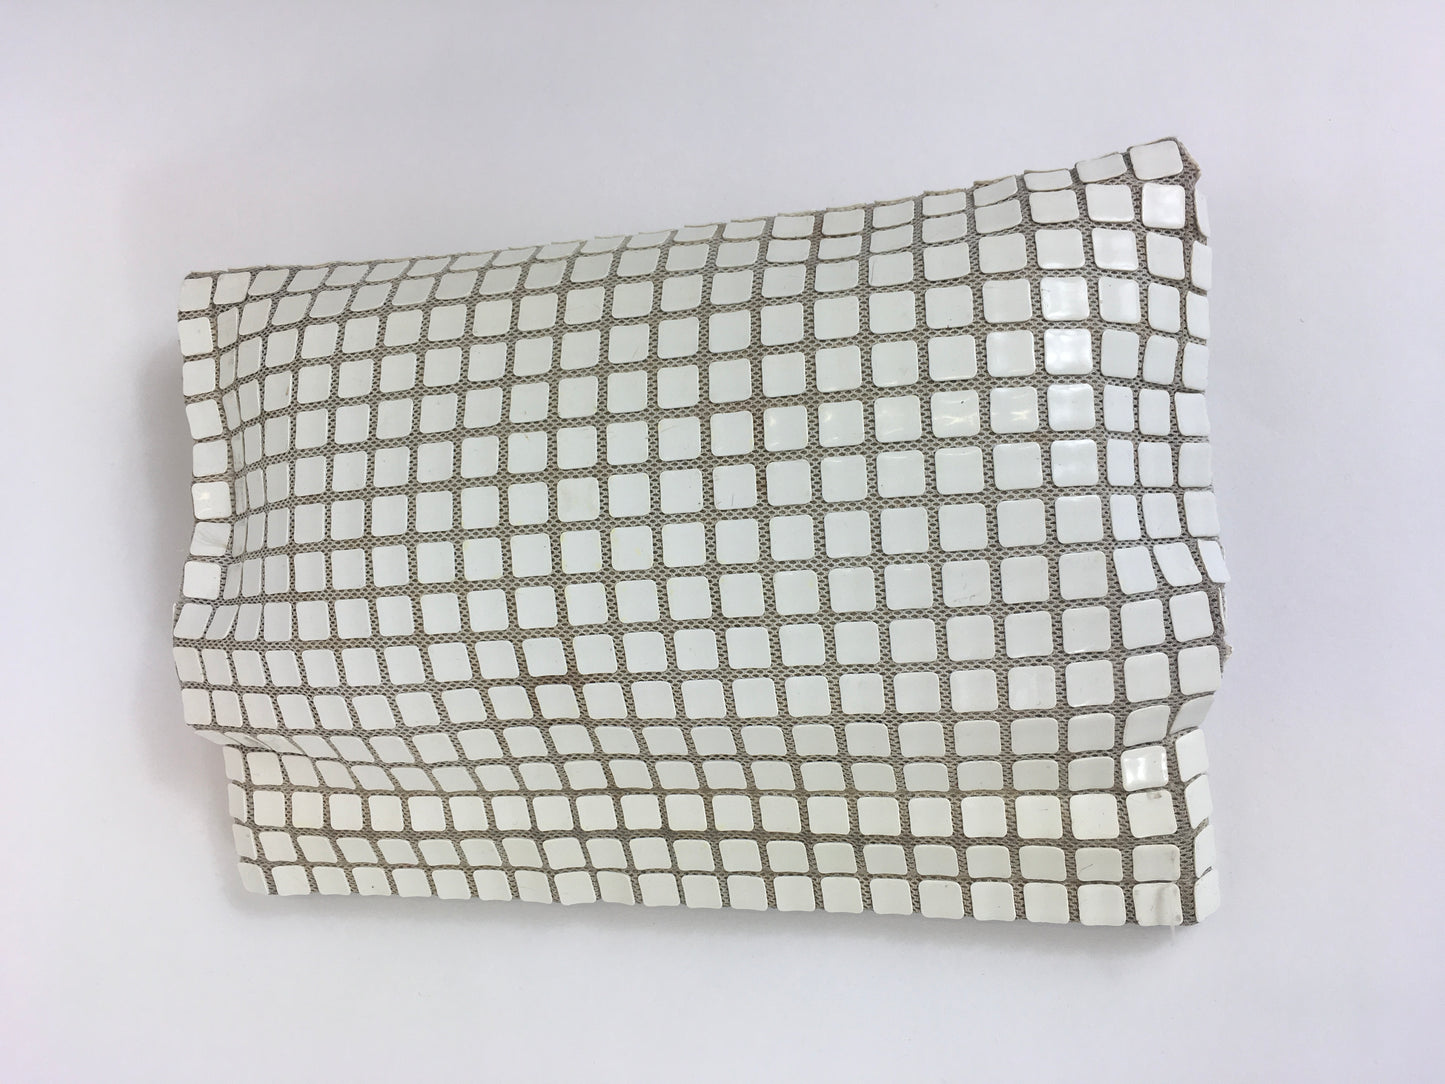 Original Late 1940’s Early 1950’s White Tiled Clutch Handbag - With Magnetic Strip Closure